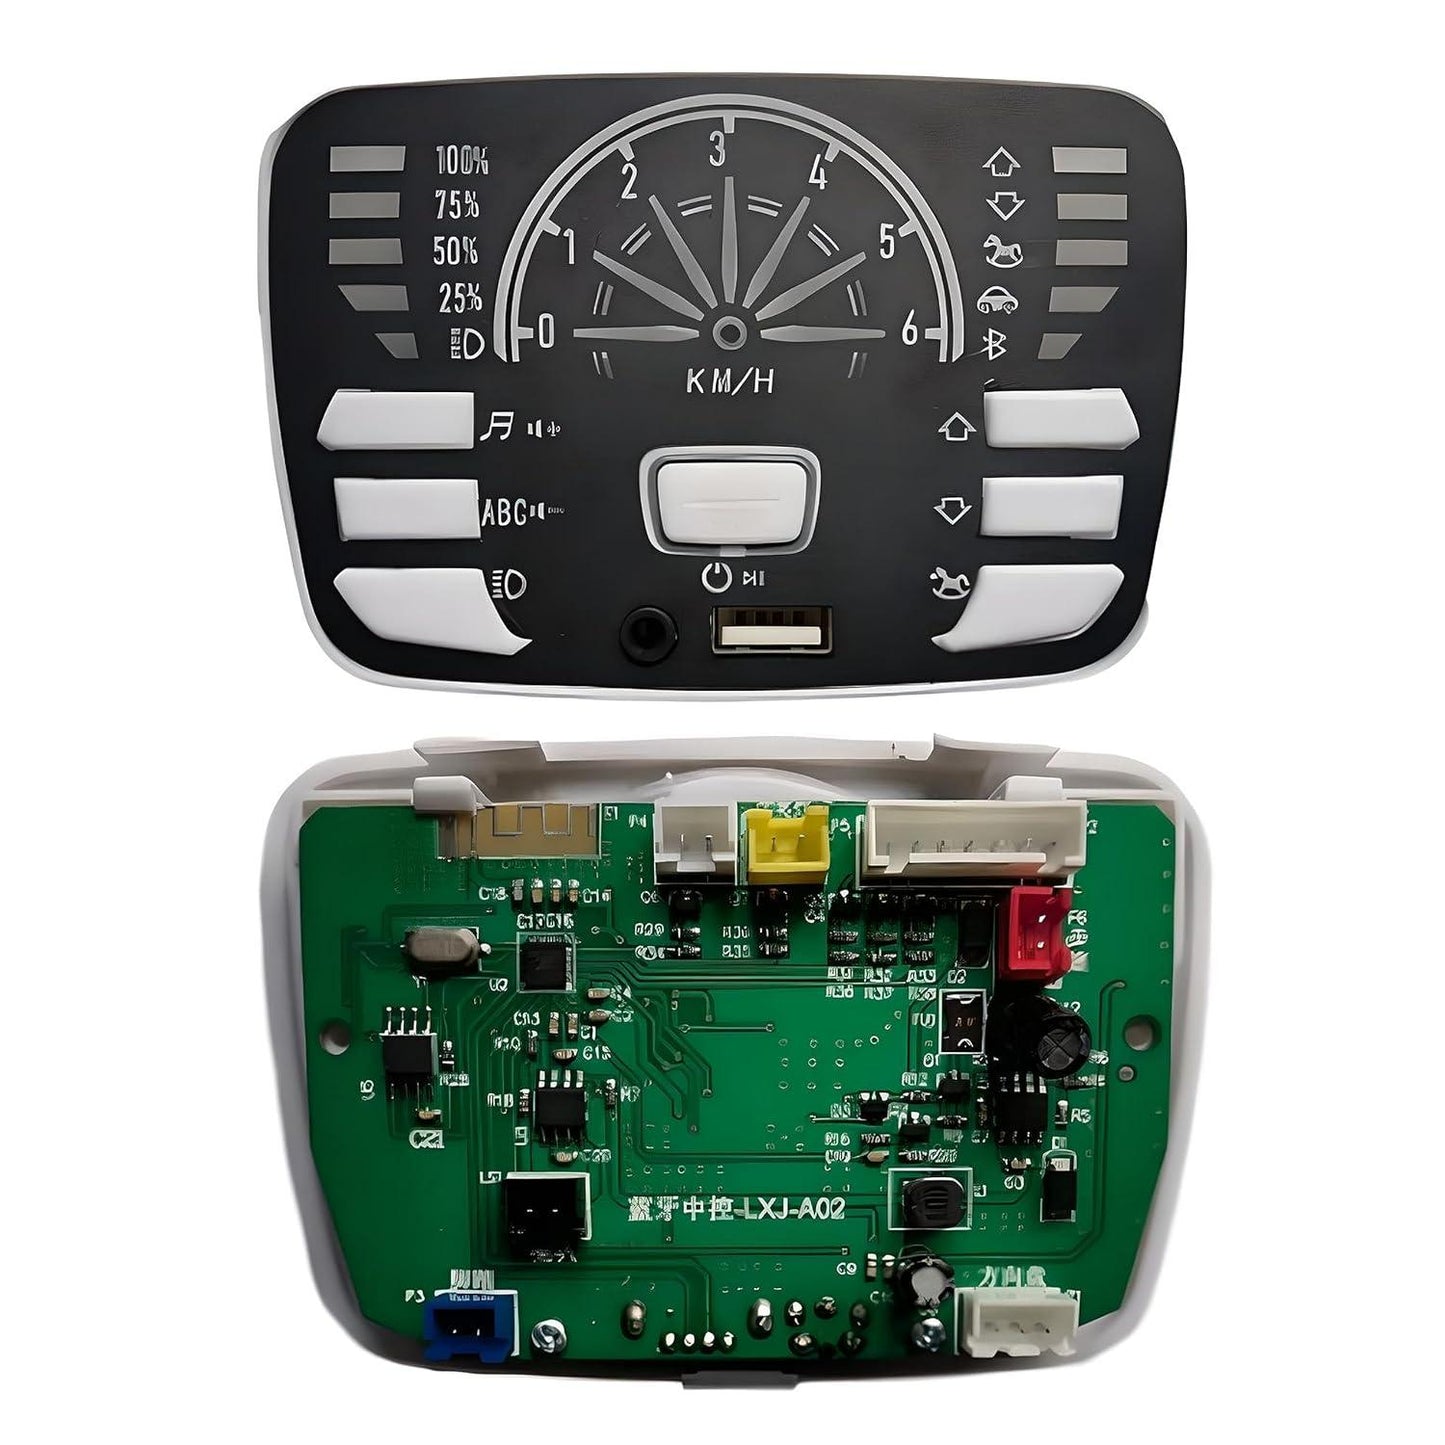 PATOYS | Central panel for Multi - functional player child riding electric car controller LXJ - A02 - PATOYS